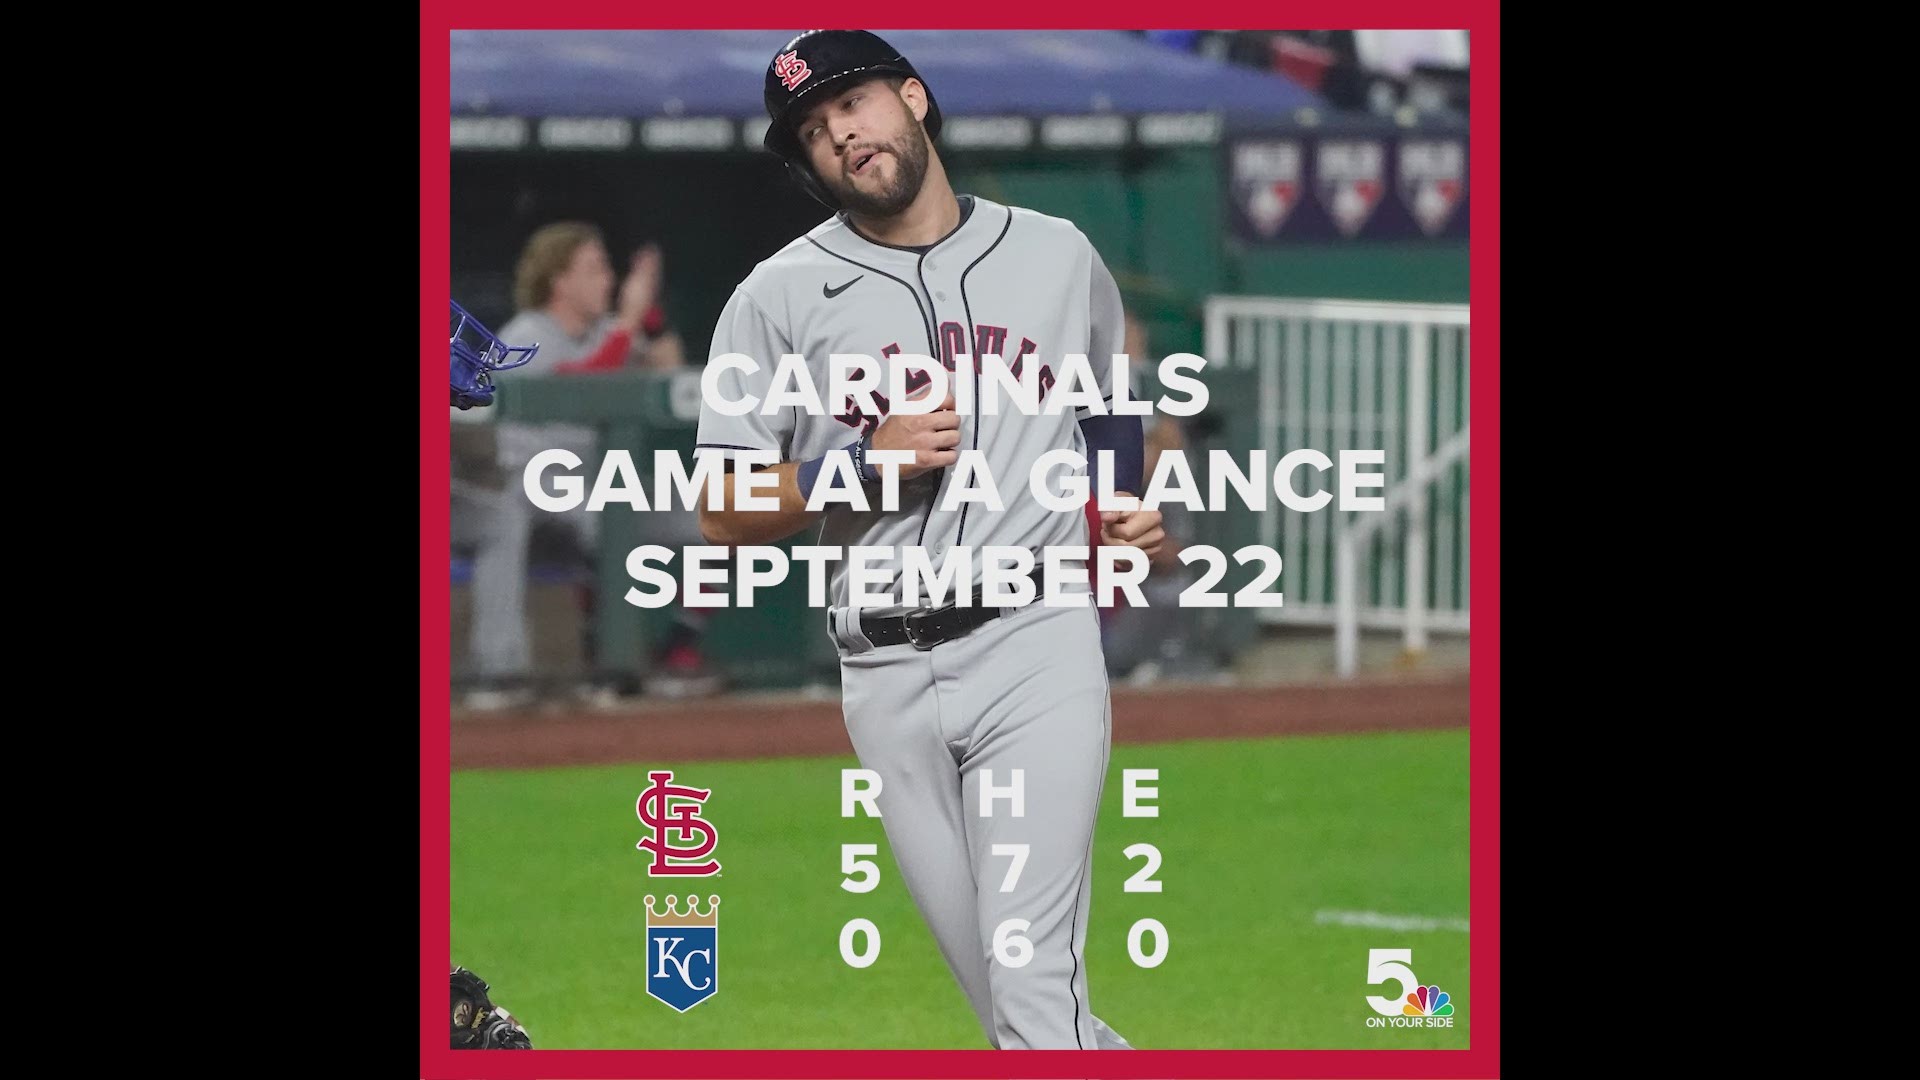 Every win is important for the Cardinals down the stretch